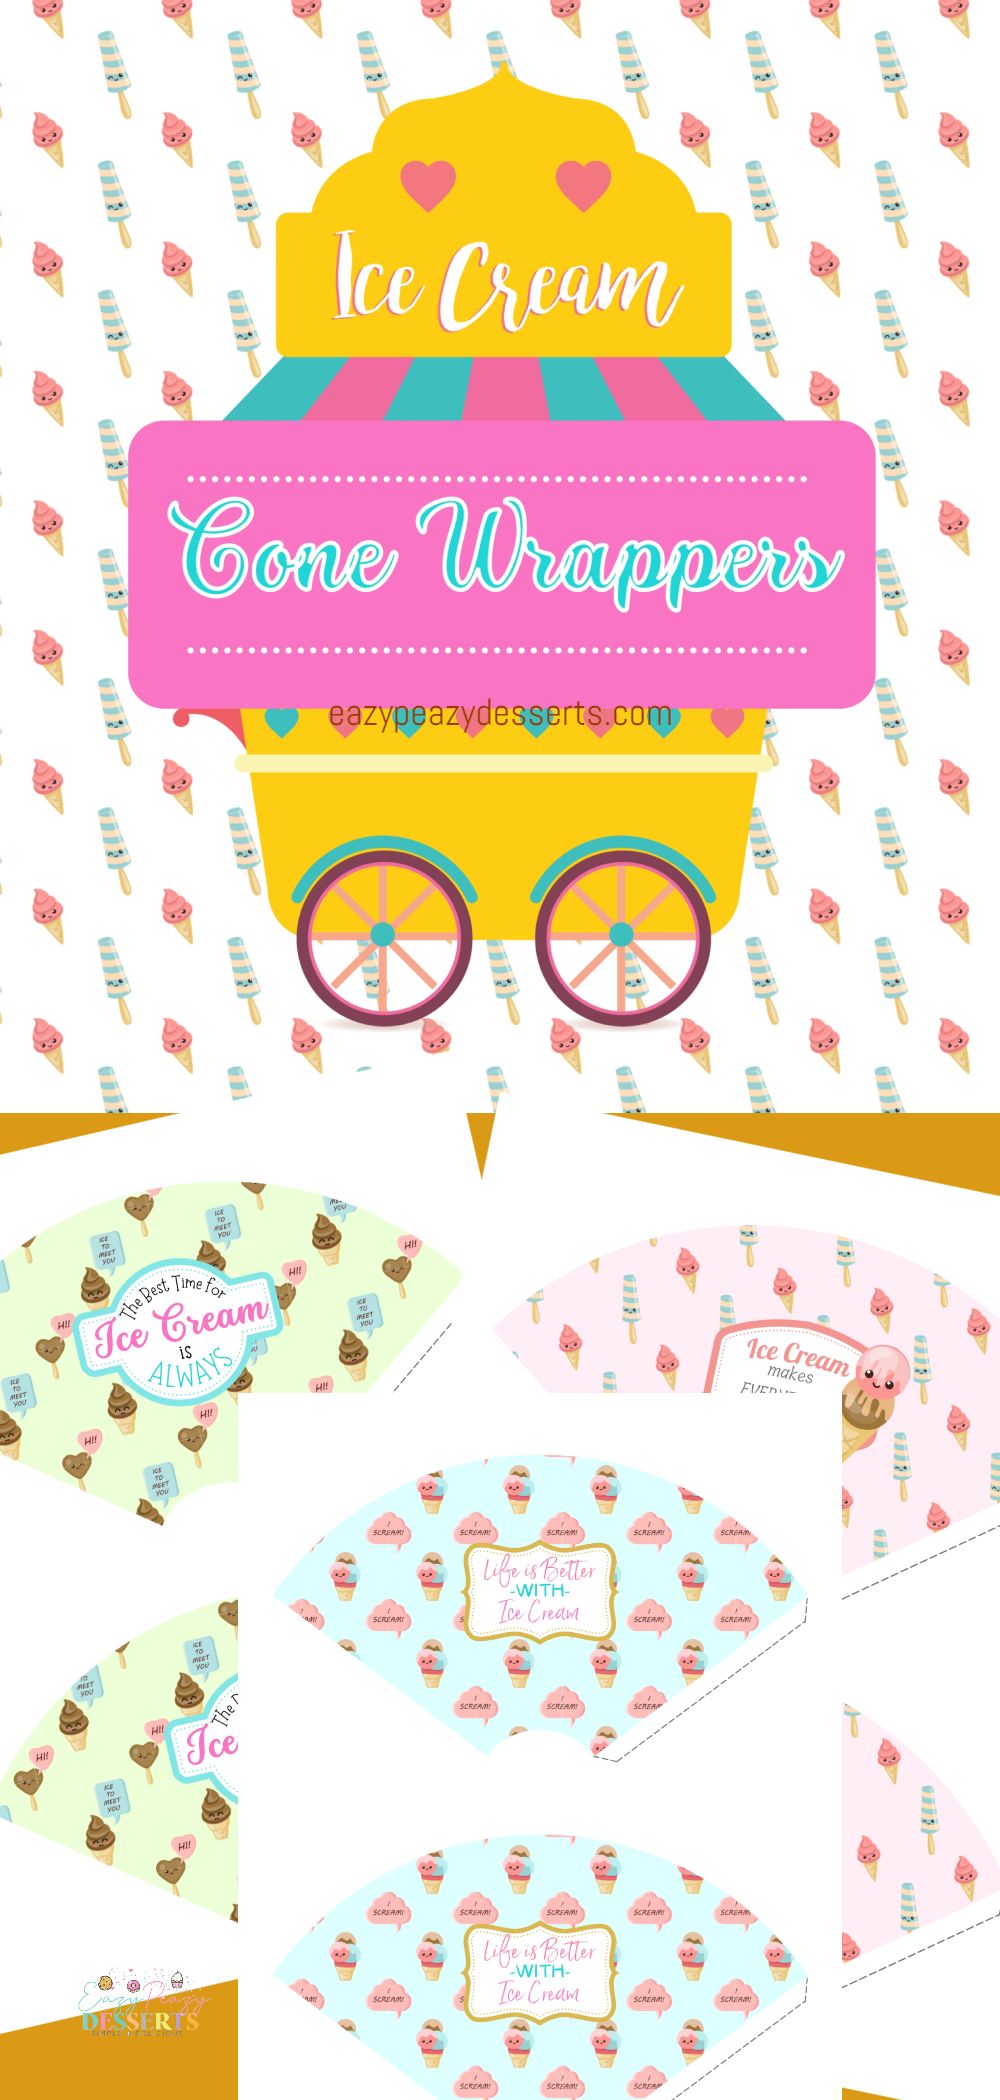 Cone wrappers printable